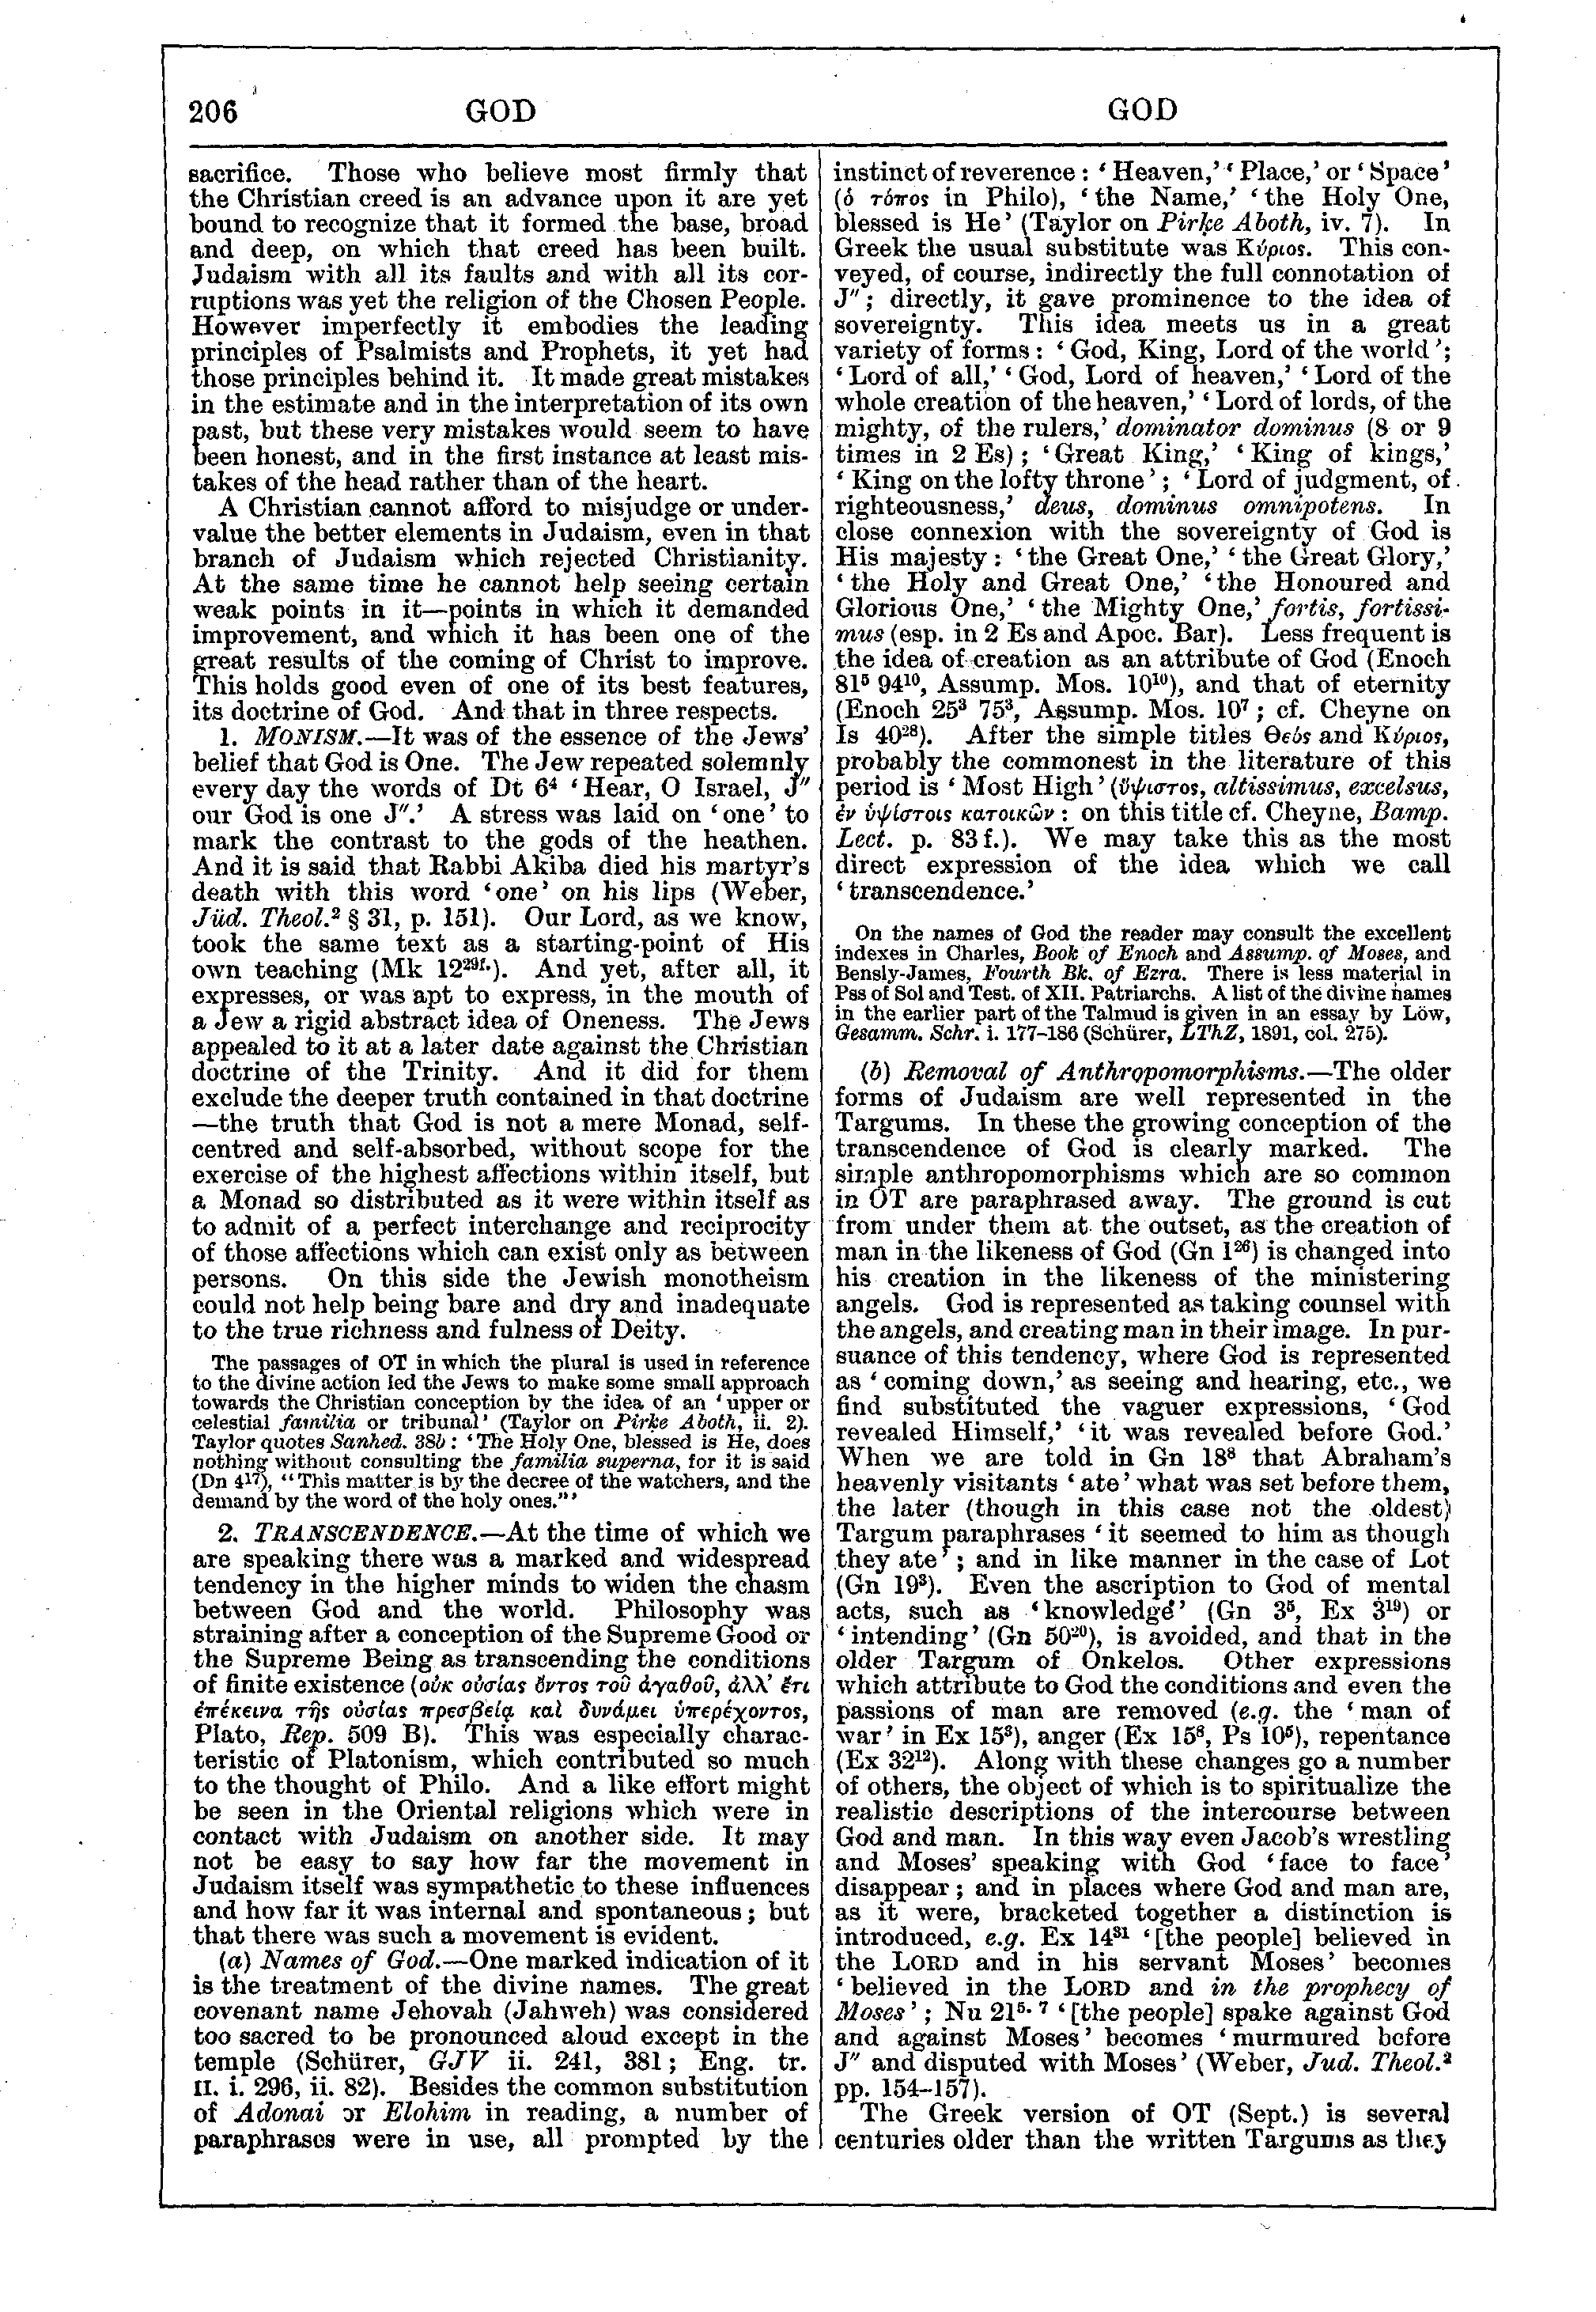 Image of page 206